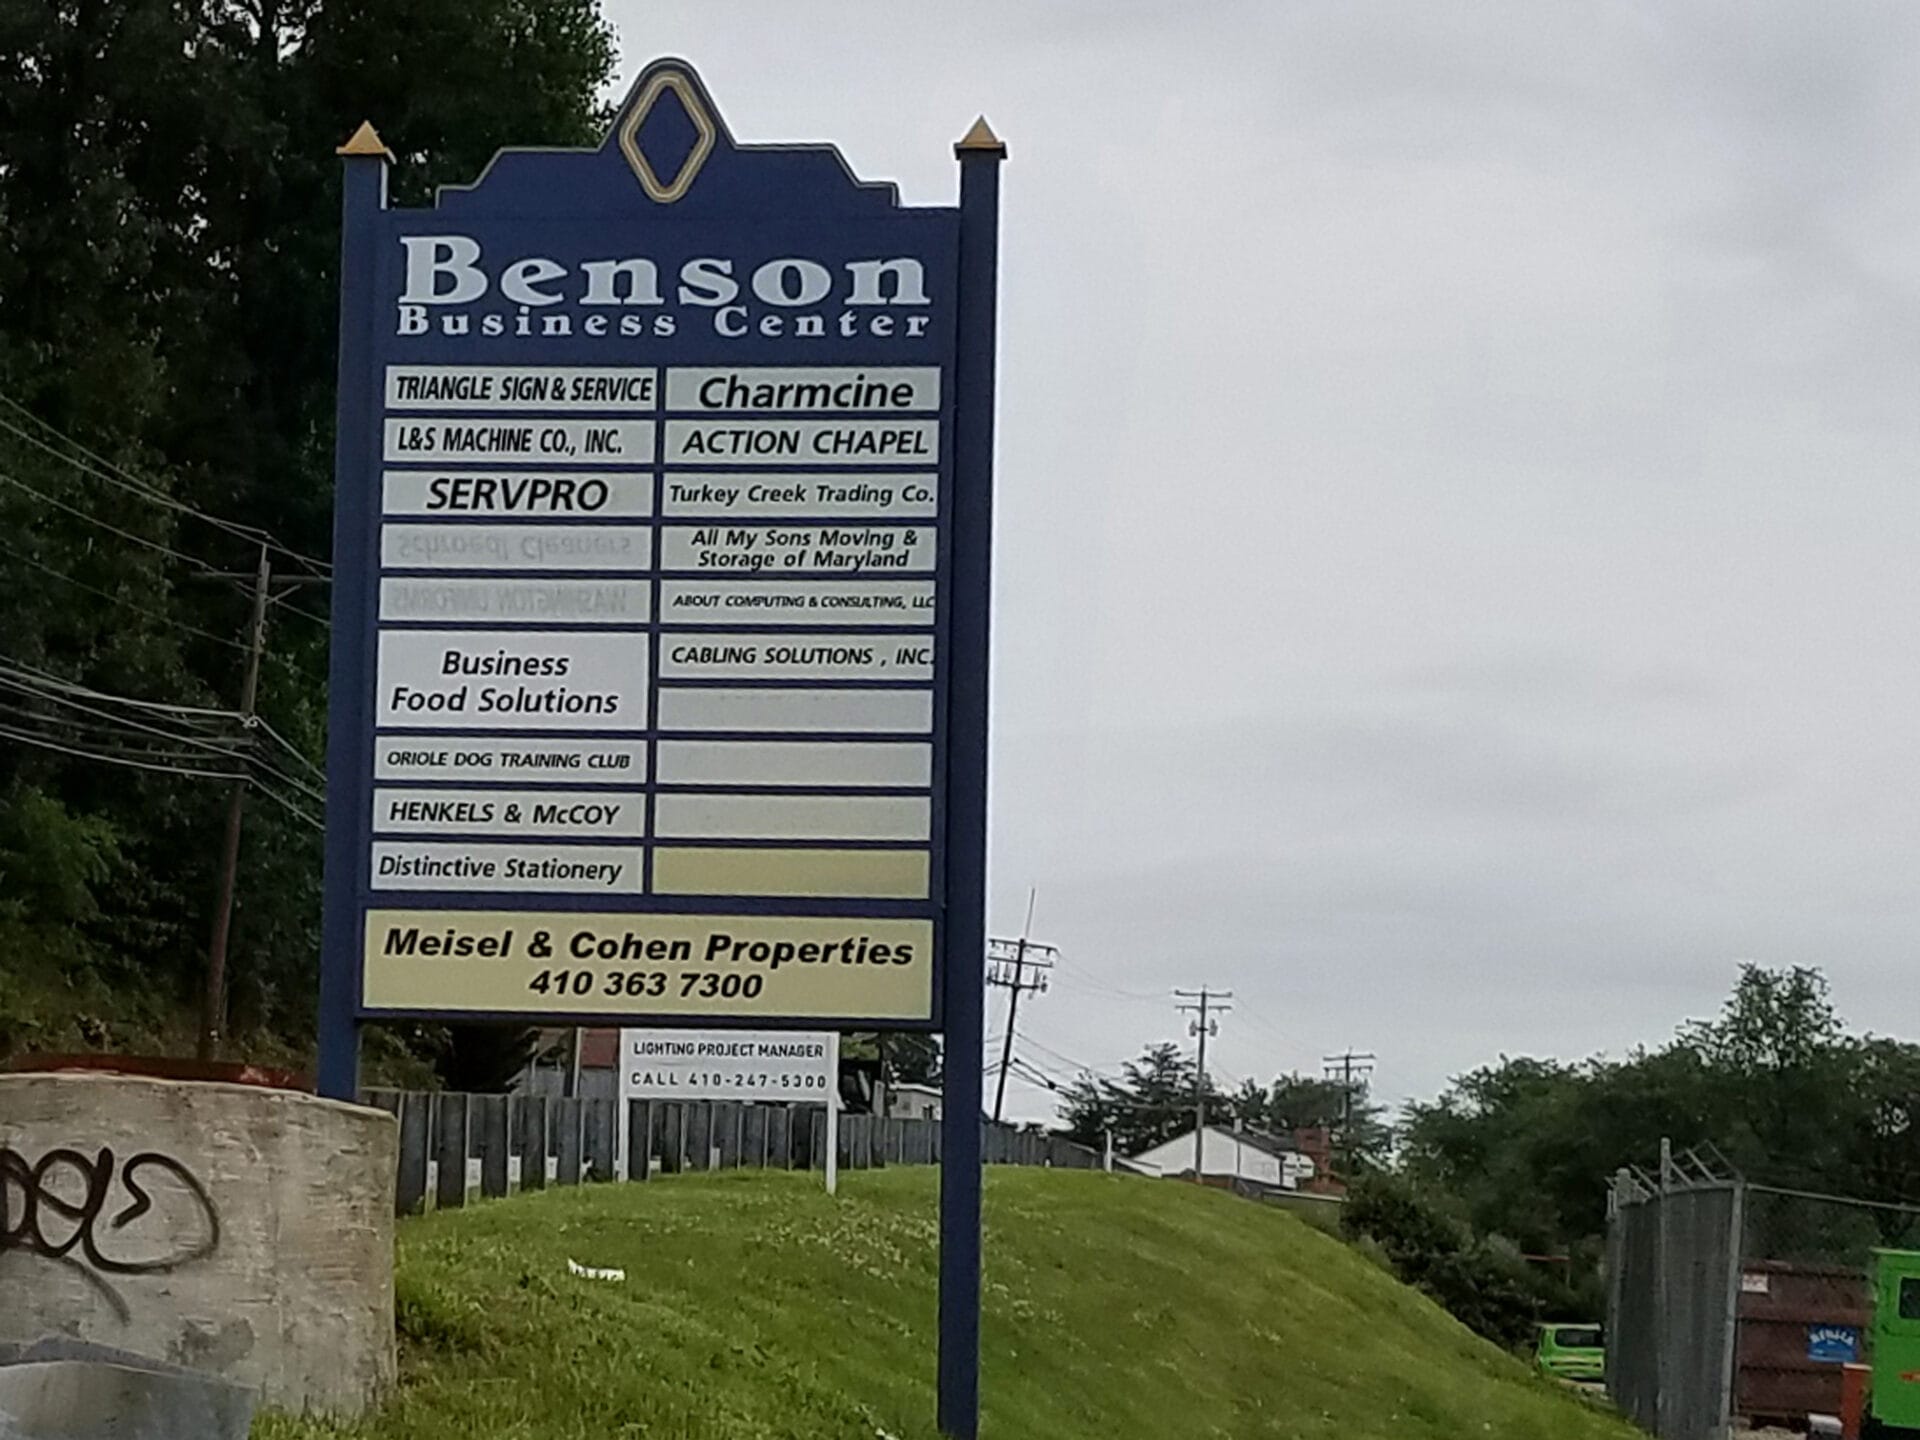 Benson sign with building occupants at oriole-dtc-halethorpe-md